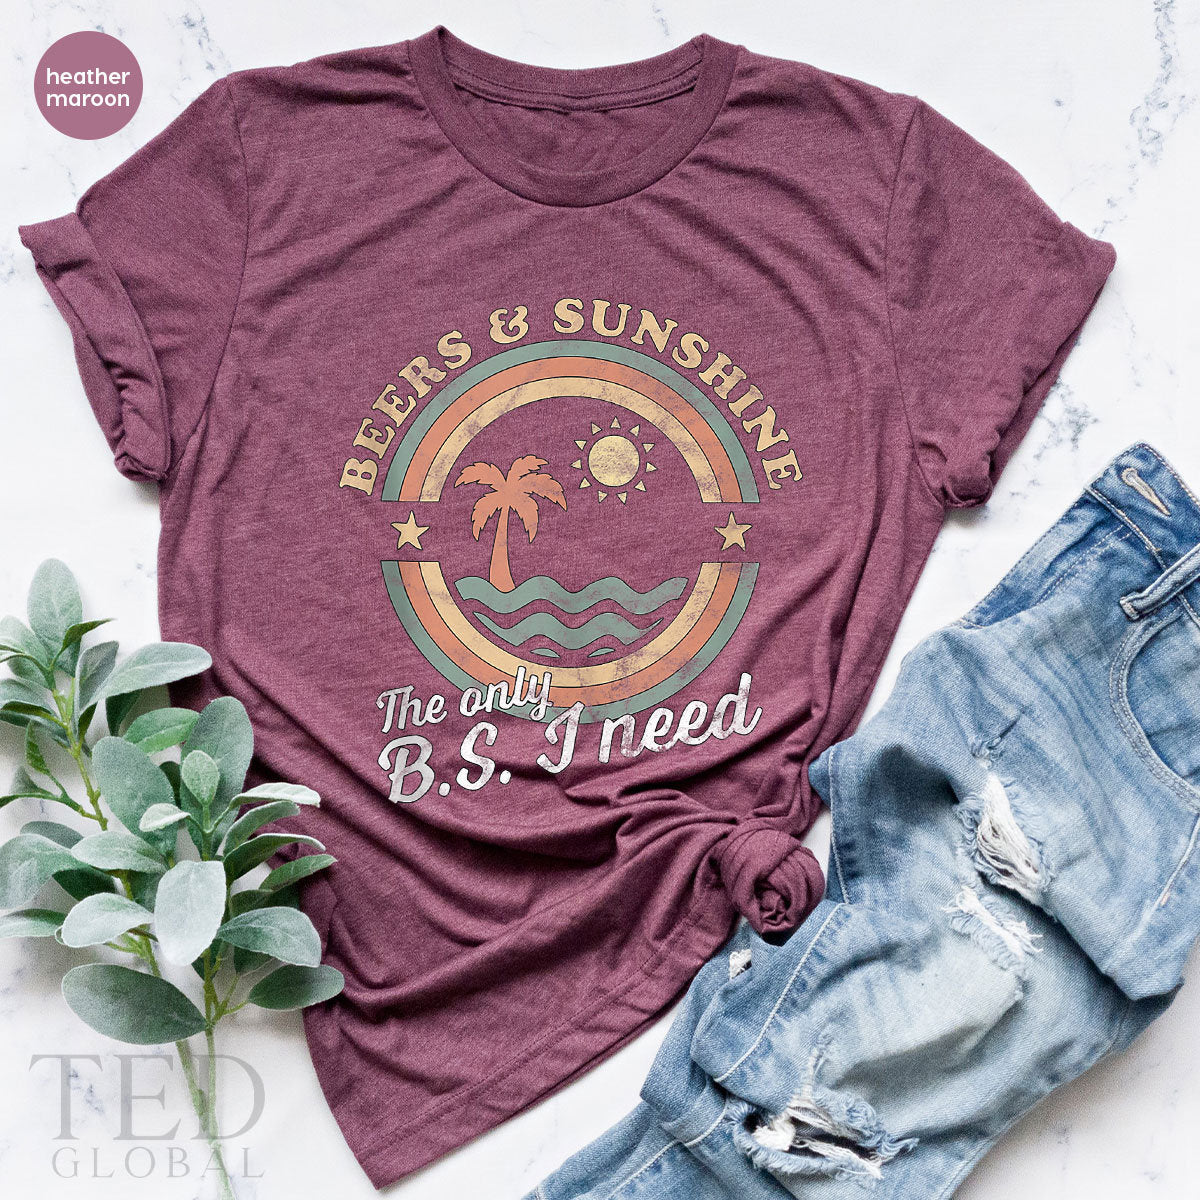 Beer Lover T-Shirt, Beers &Sunshine T Shirt, Alcohol Lover Tee, Vacation Beer Shirts, Beach Shirt, Beer TShirt, Gift For Drinker Lover - Fastdeliverytees.com